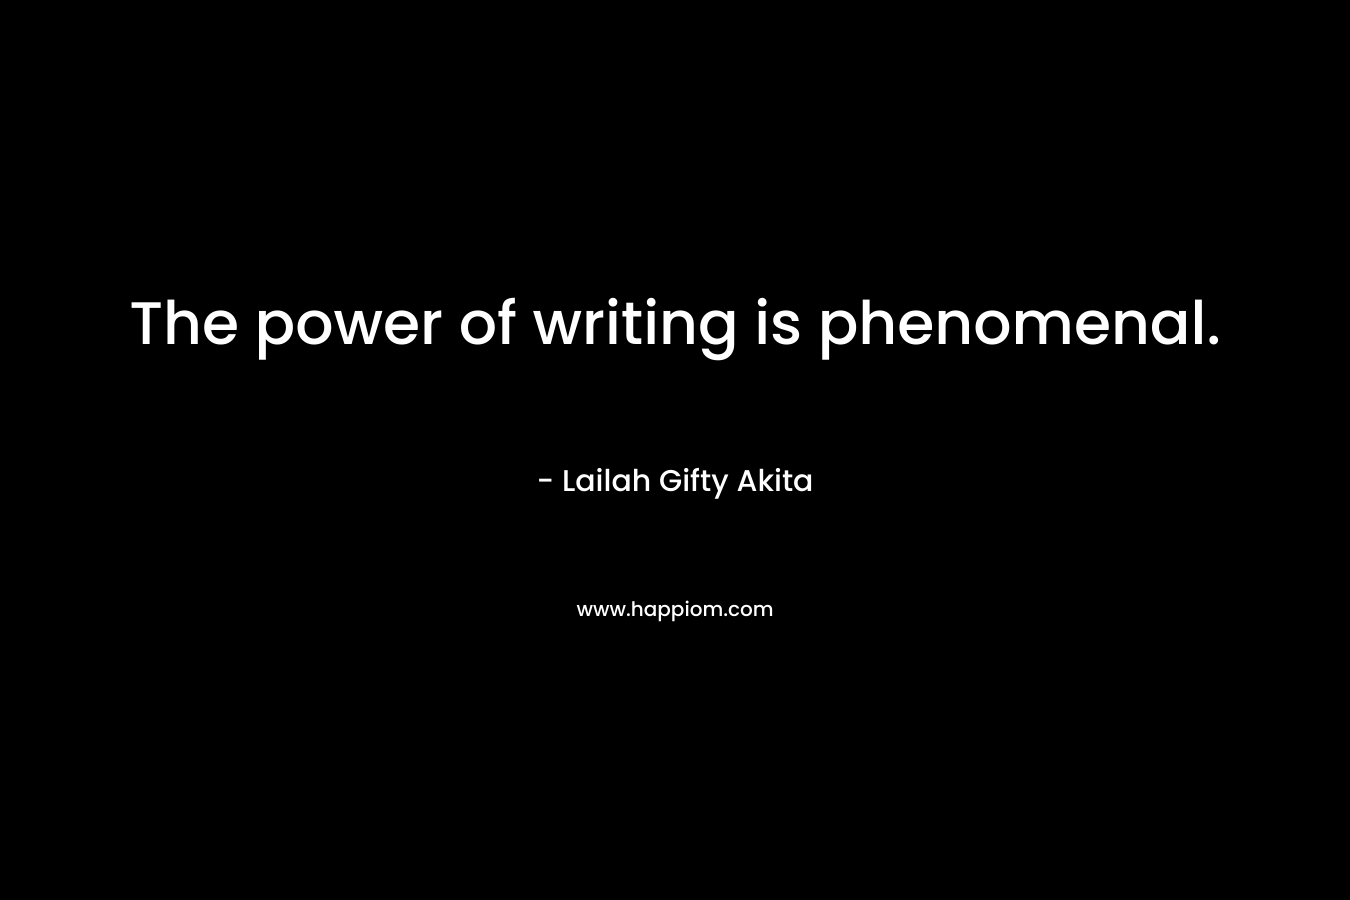 The power of writing is phenomenal.